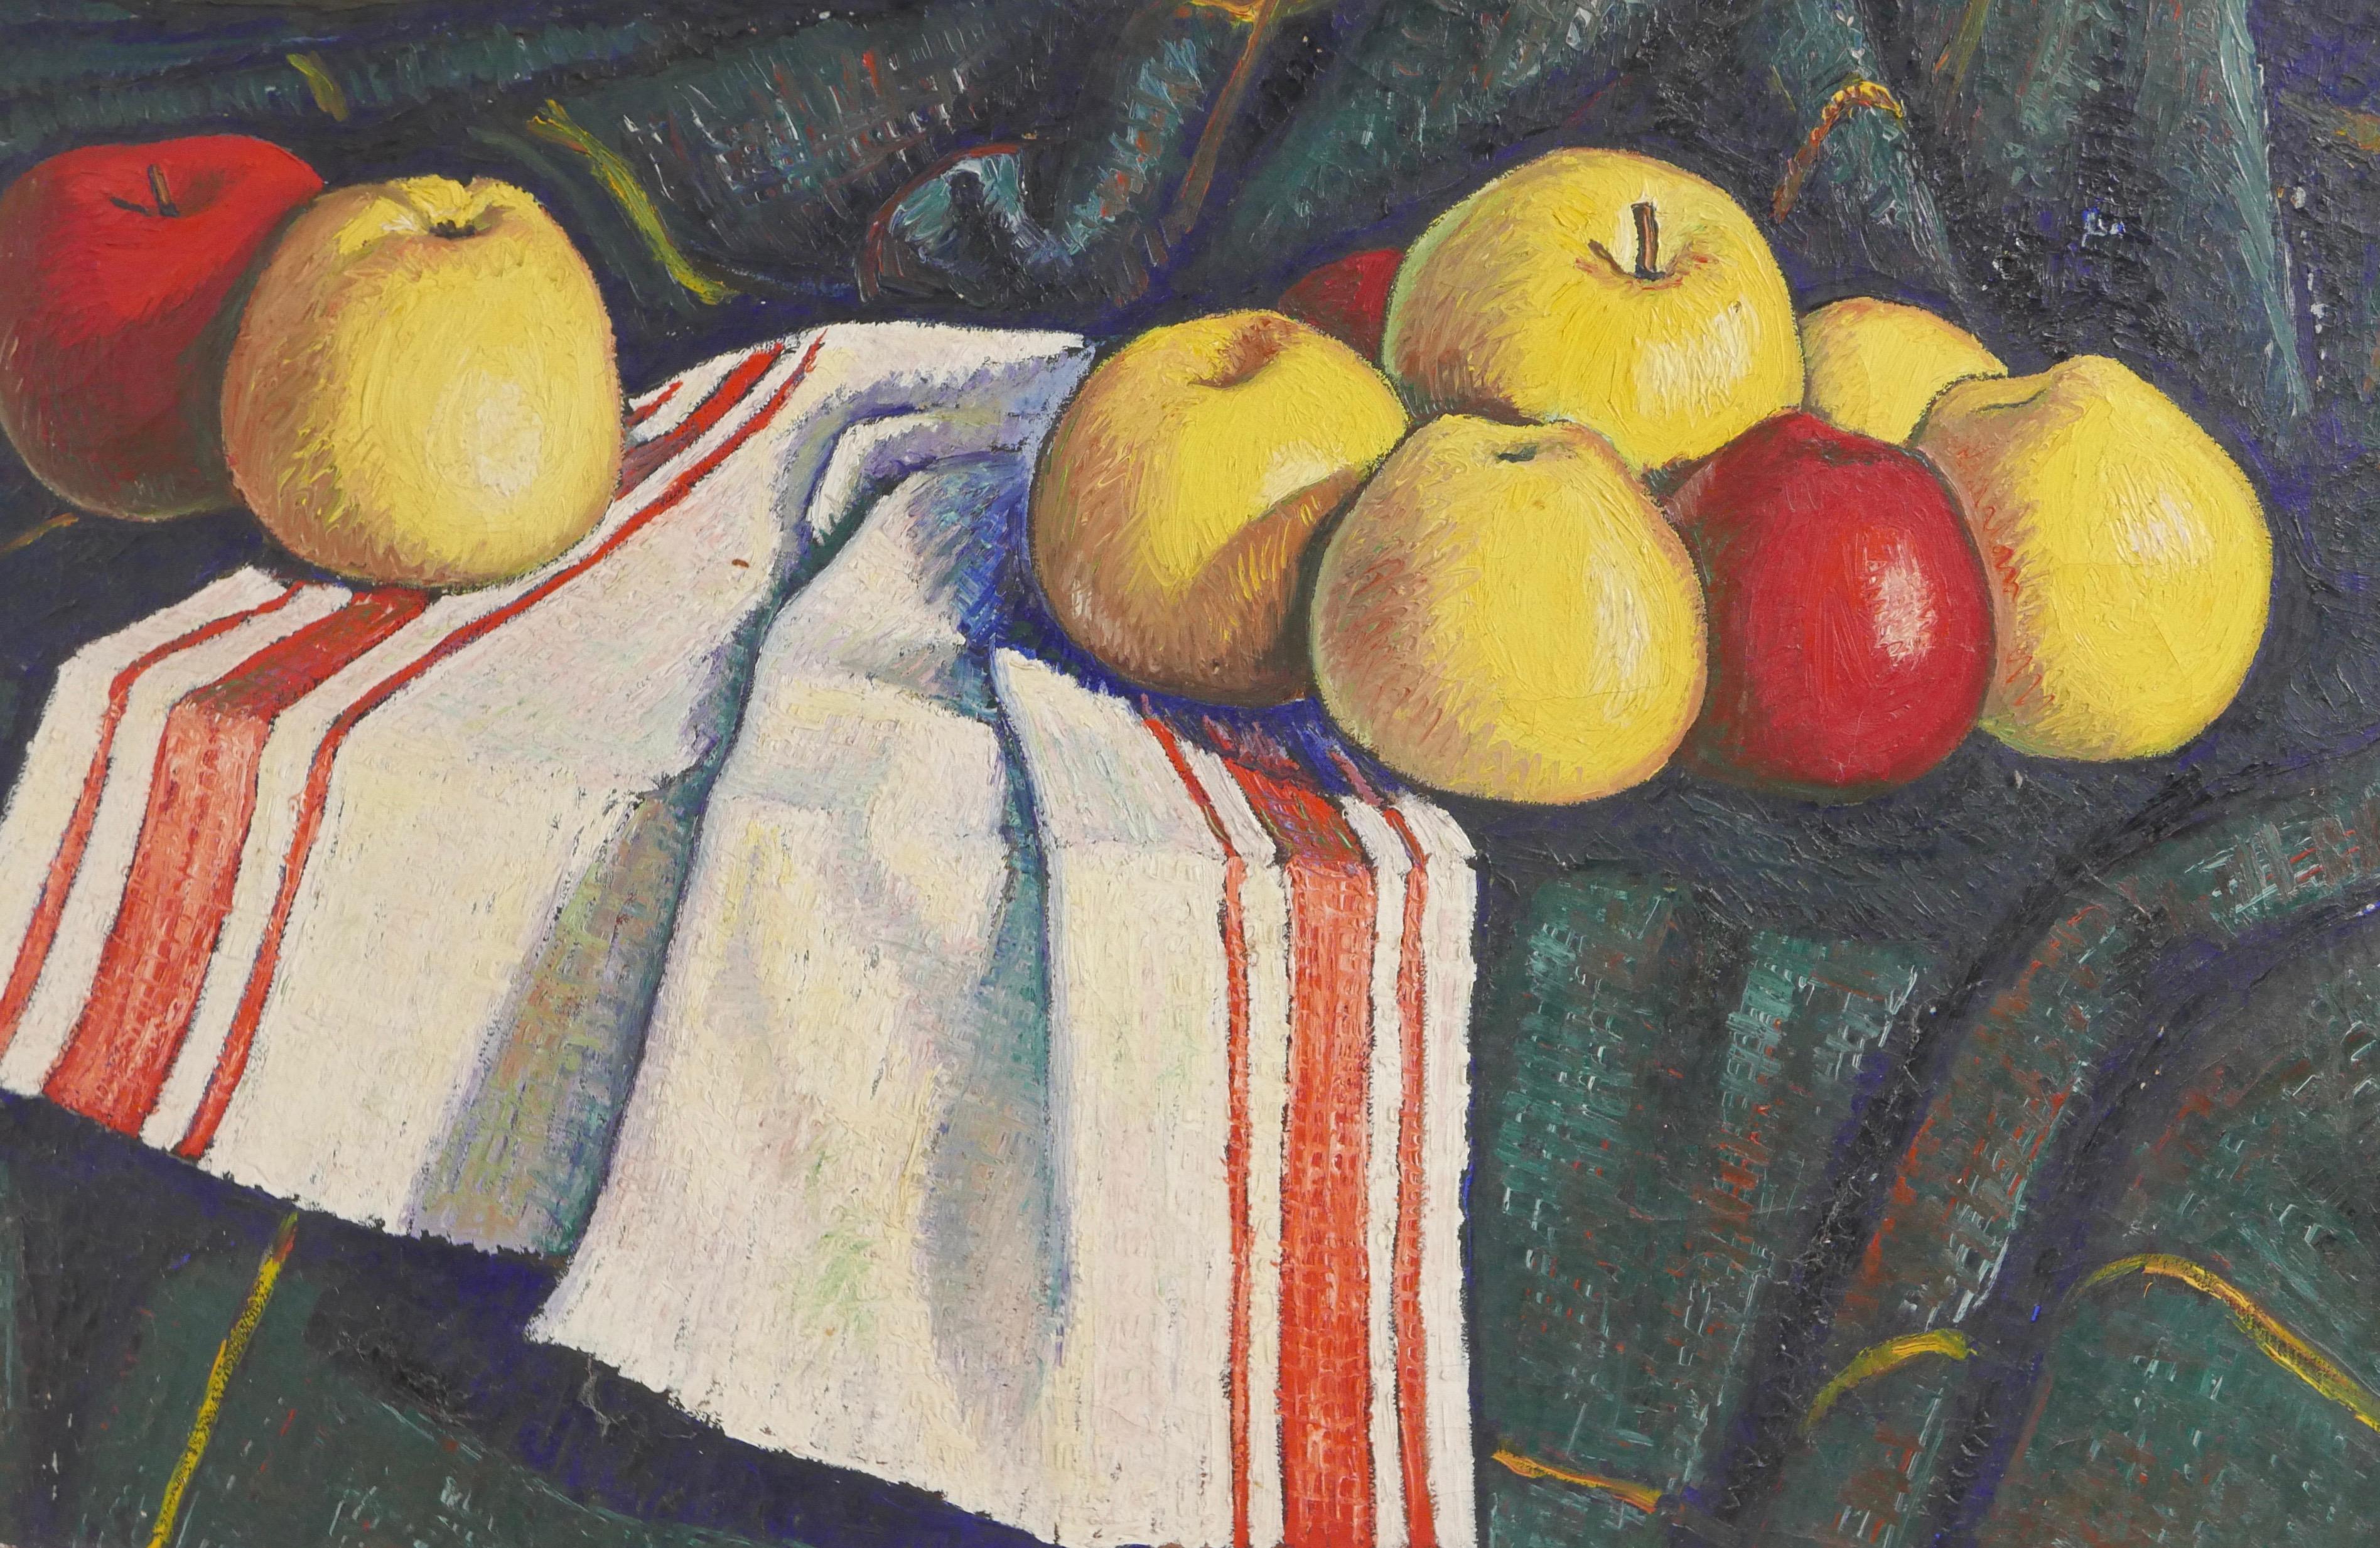 Pair of Mid-20th Century Still Life Paintings of Fruit Signed Bolomey, 1948 For Sale 1